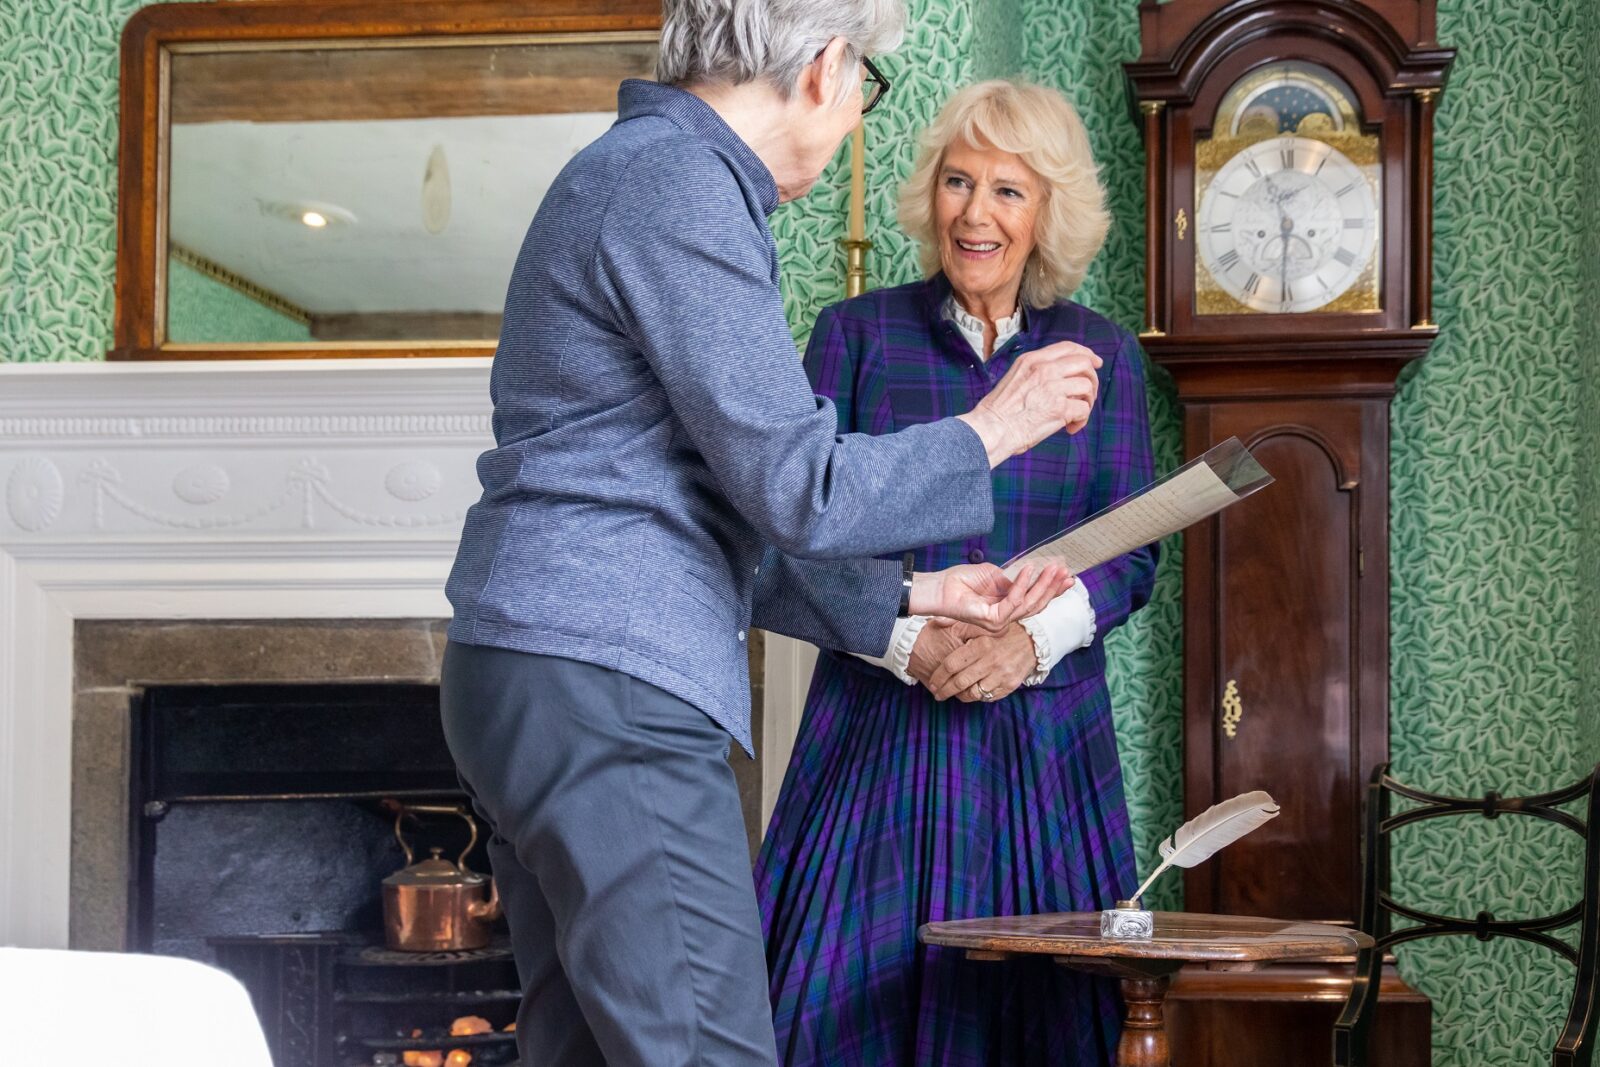 HRH The Duchess of Cornwall with Professor Kathryn Sutherland by Jane Austen's writing table.